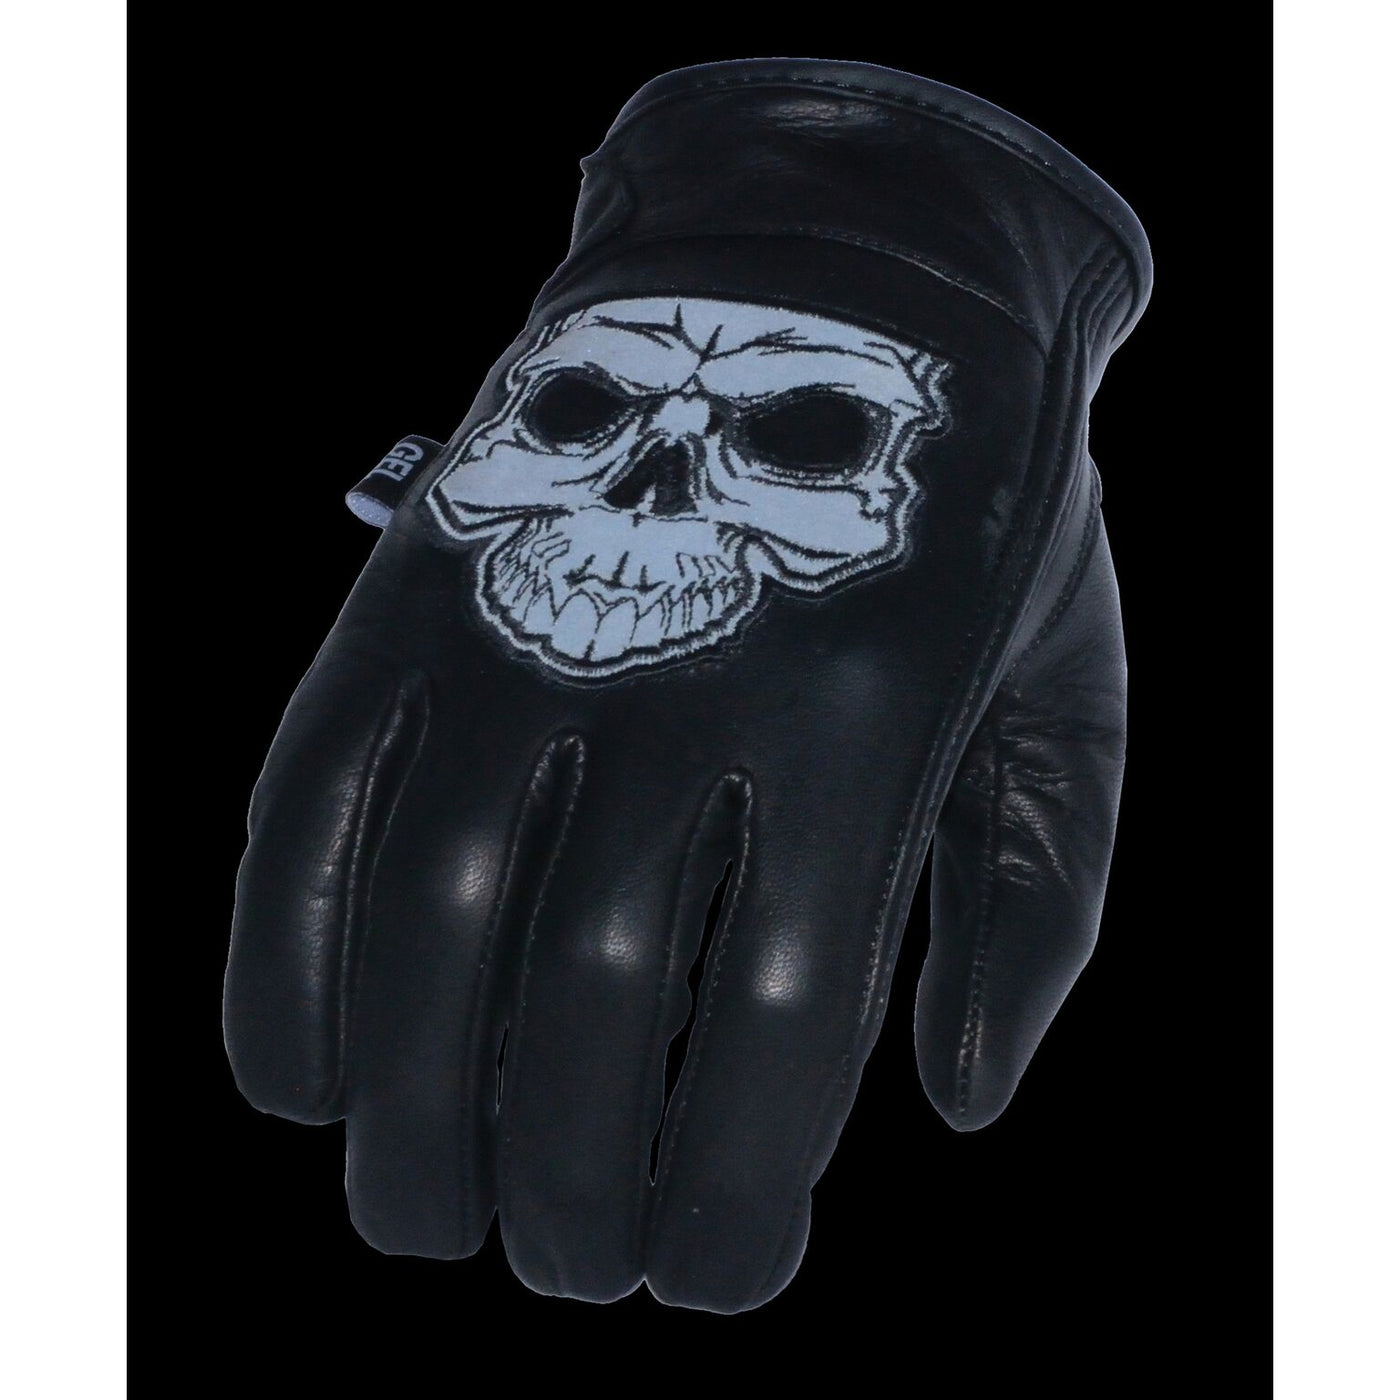 Night time reflective view of Leather motorcycle riding gloves with reflective skull pictured on back of hand. They are available in sizes XS-3X and have a thermal lining and velcro wrist closure. They are available in our shop just outside Nashville in Smyrna, TN.